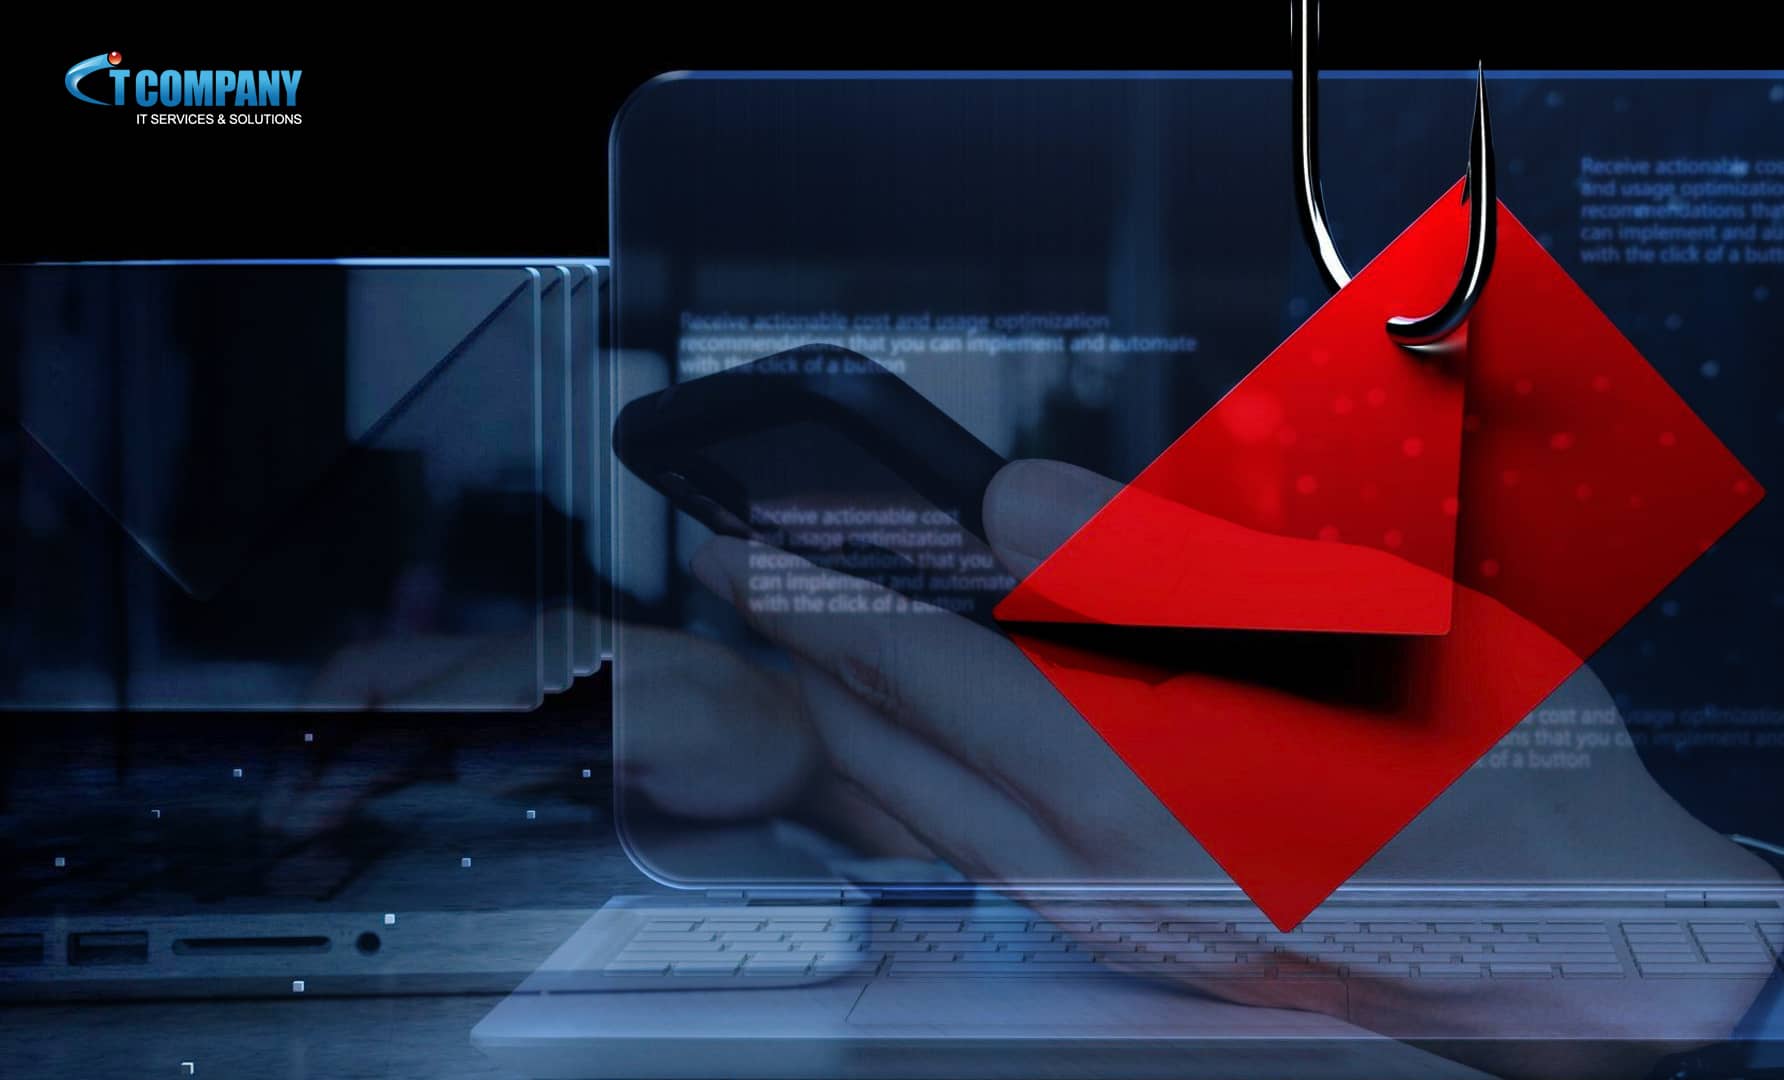 Business email hackings are on the rise